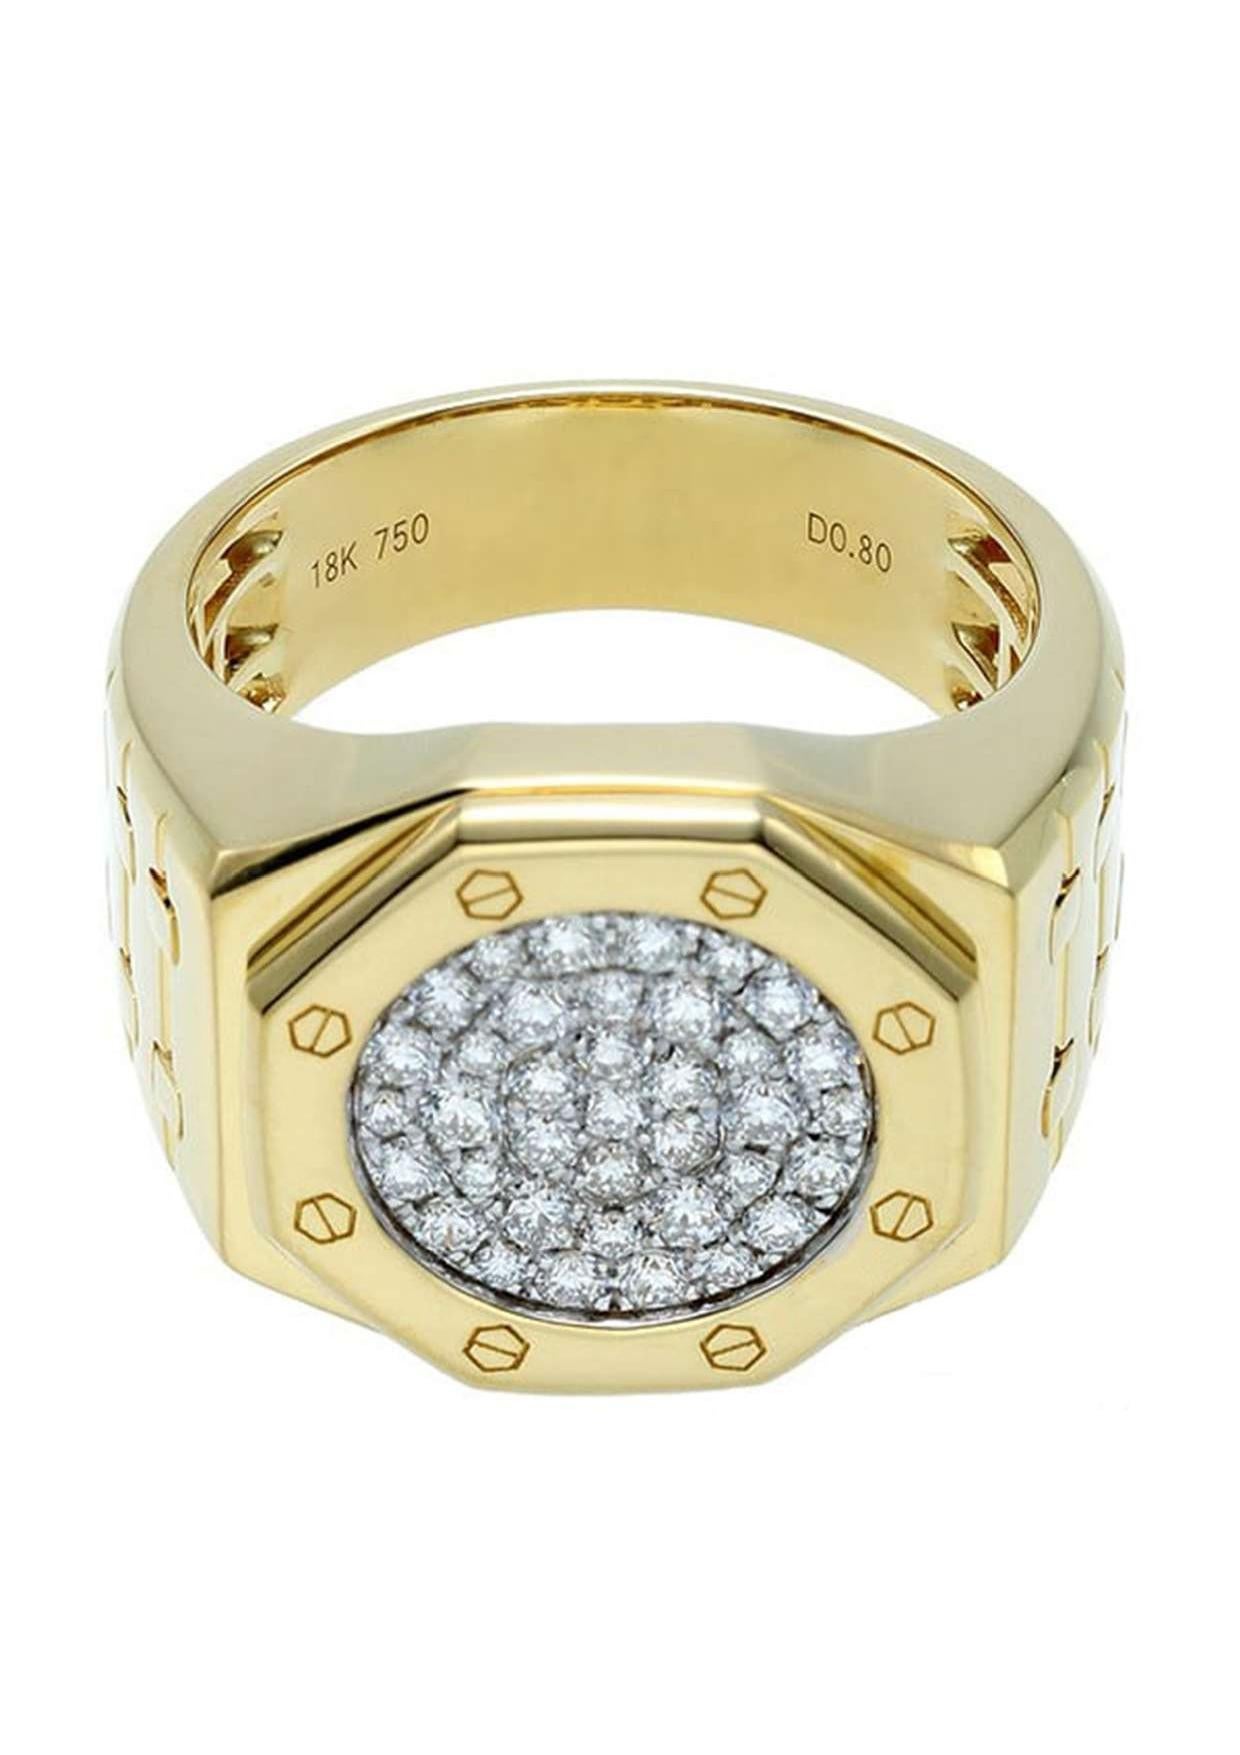 Artist 18K Yellow Gold Clock-Shaped Diamond Ring, 0.80ct, Size 11.25 For Sale